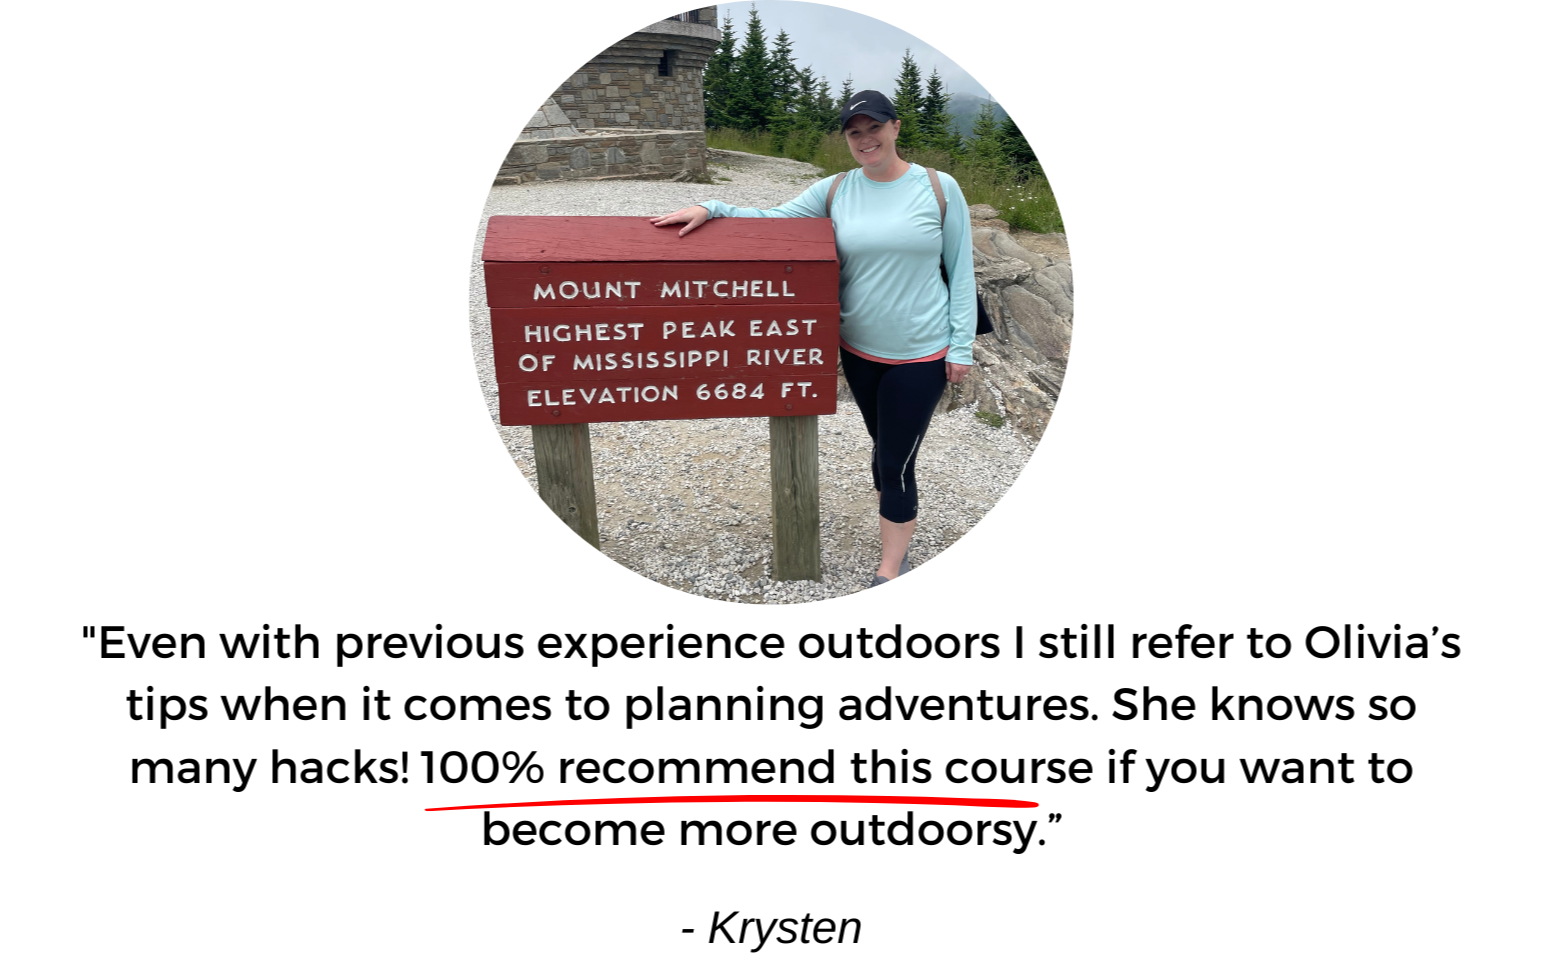 i 100% recommend this course if you want to become more outdoorsy